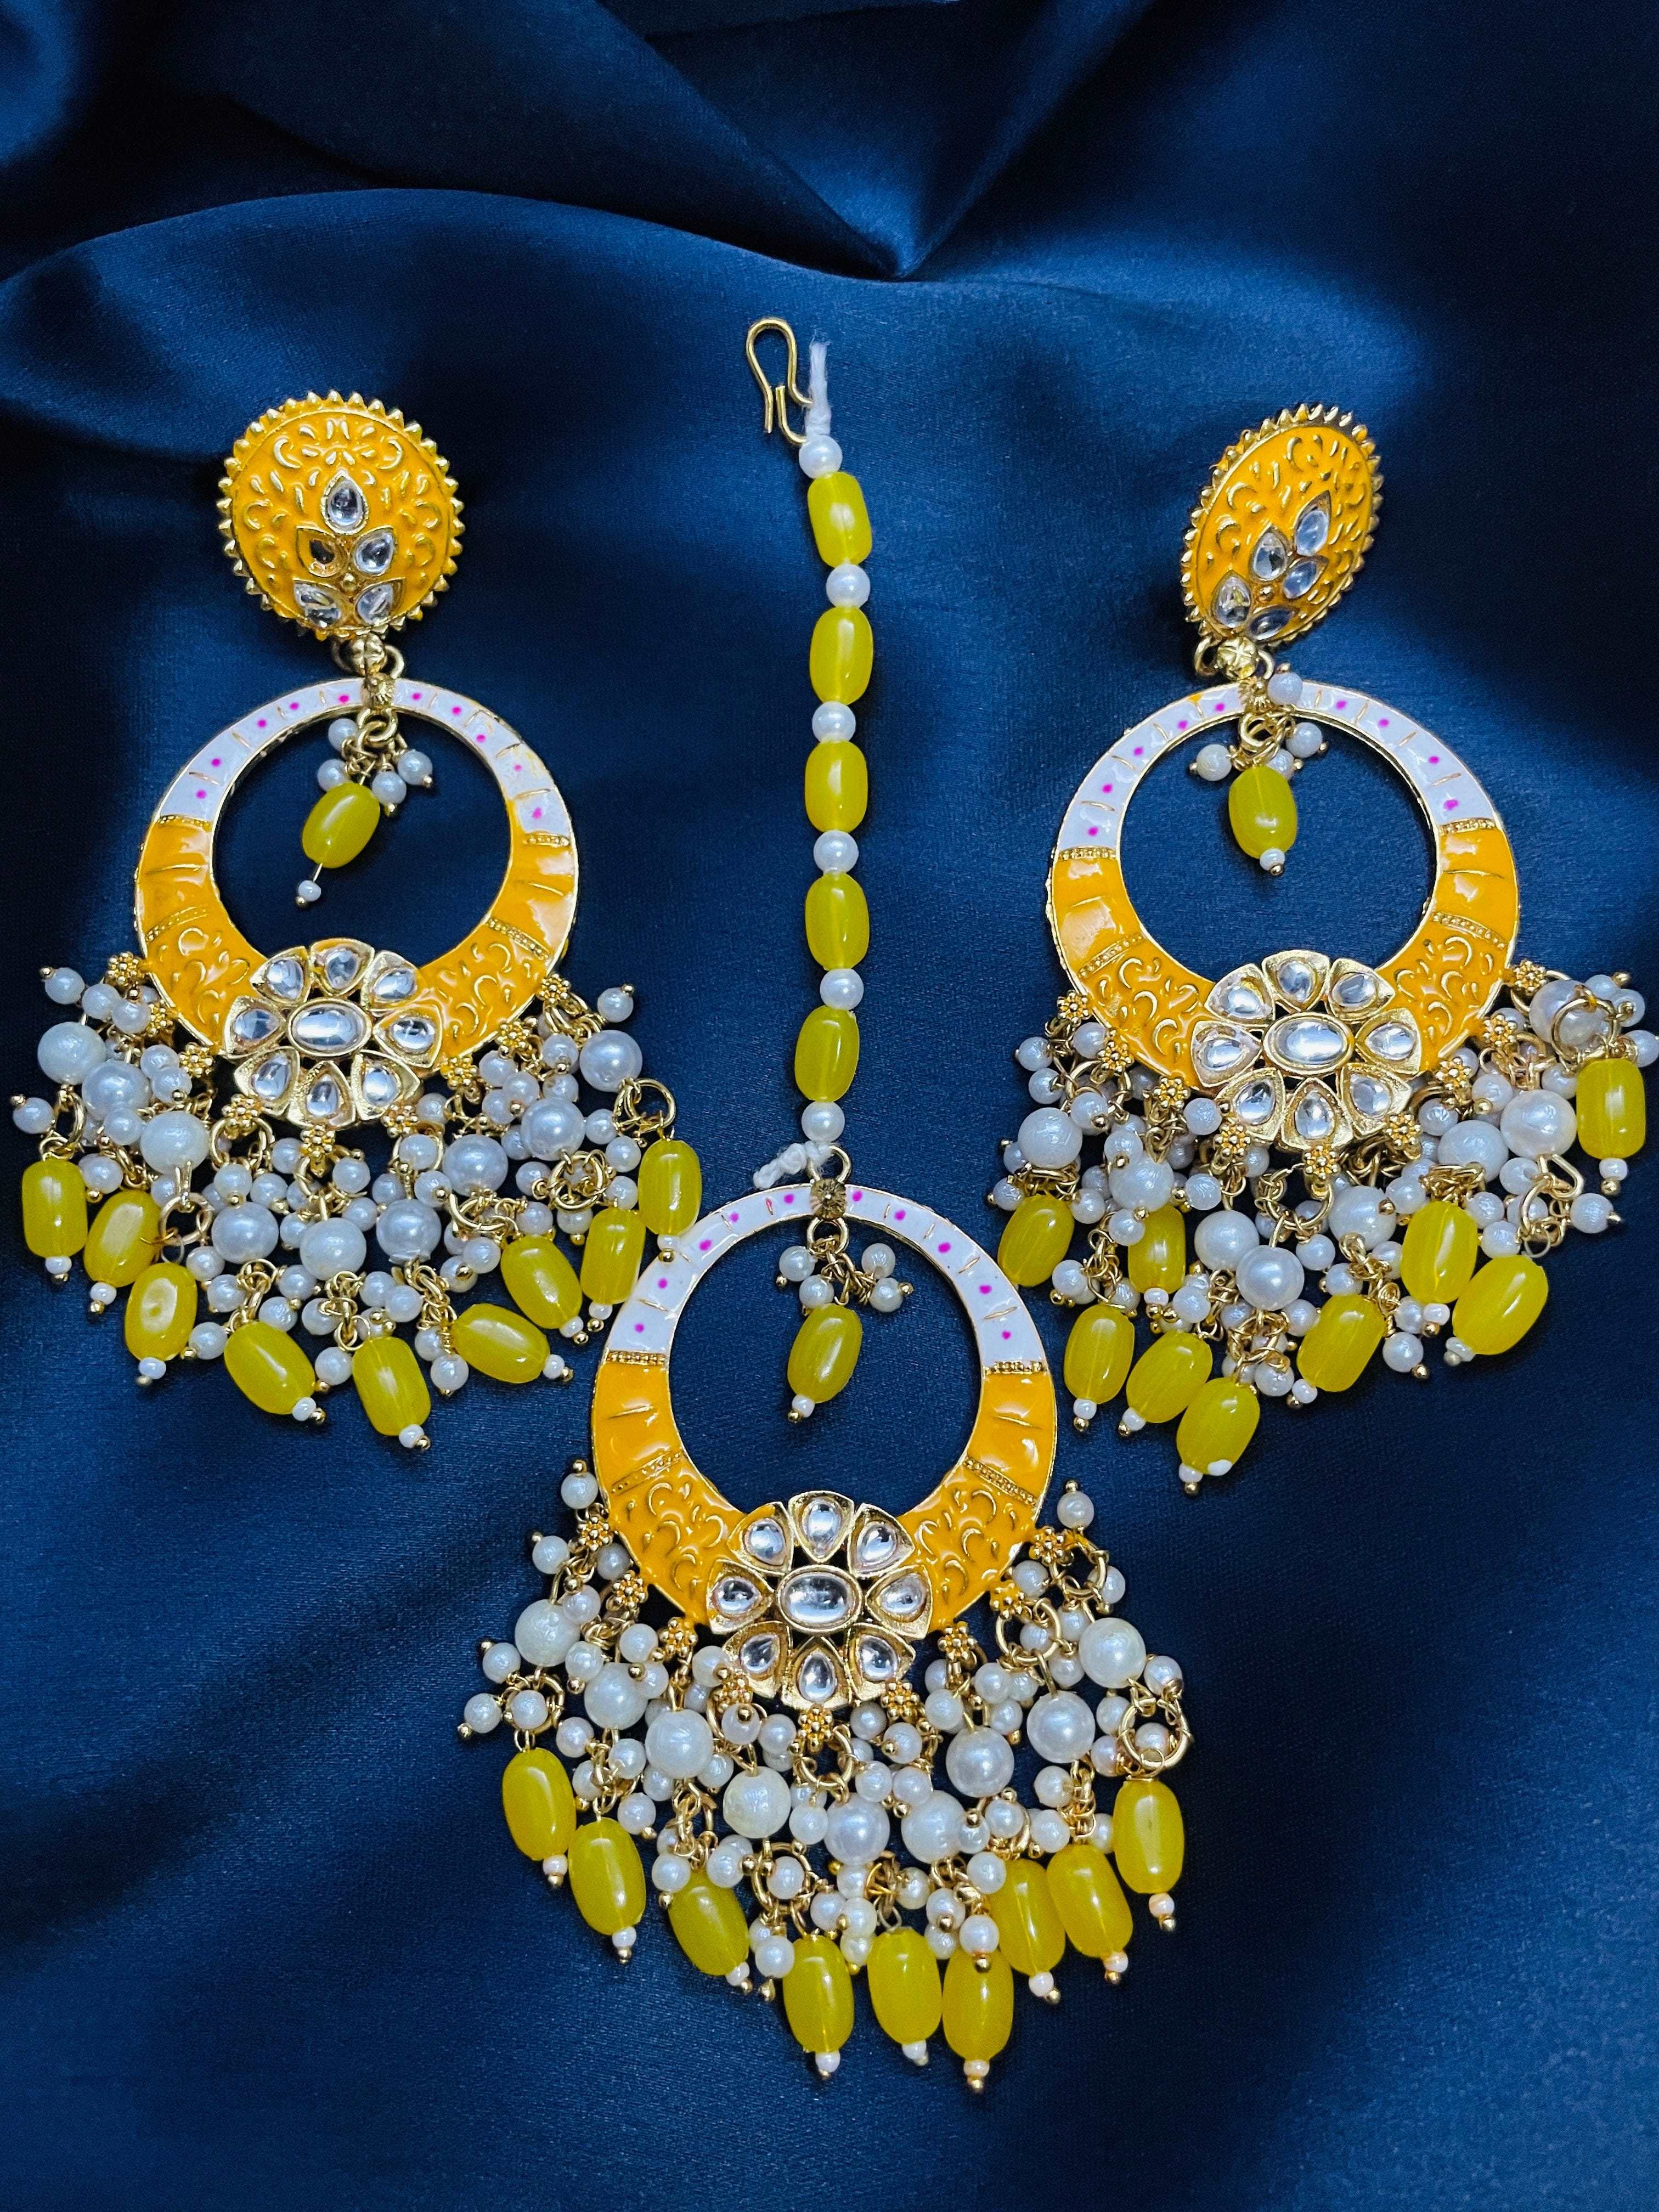 Flipkart.com - Buy CRUNCHY FASHION Ethnic Gold Plated Yellow Beads & Pearl  Large Bali Hoop Jhumka/Jhumka Earrings Alloy Drops & Danglers Online at  Best Prices in India